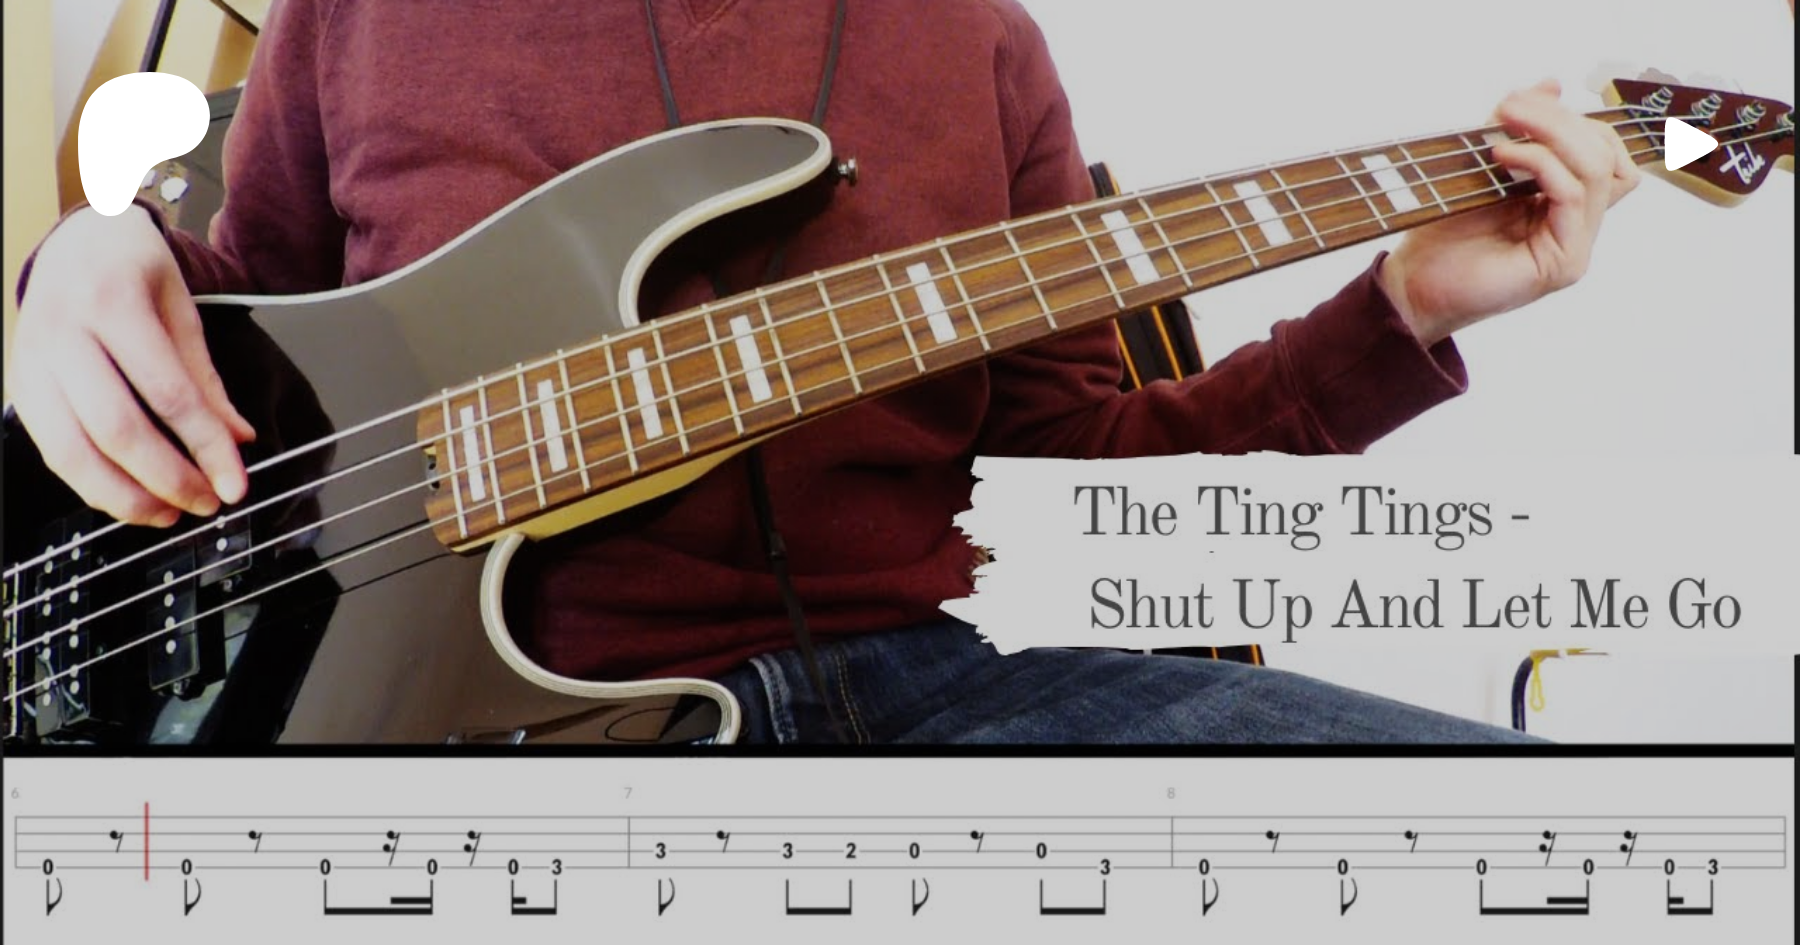 Ау на гитаре. The Ting Tings shut up and Let me go. Mango Guitar. Shut up and Practice Guitar.